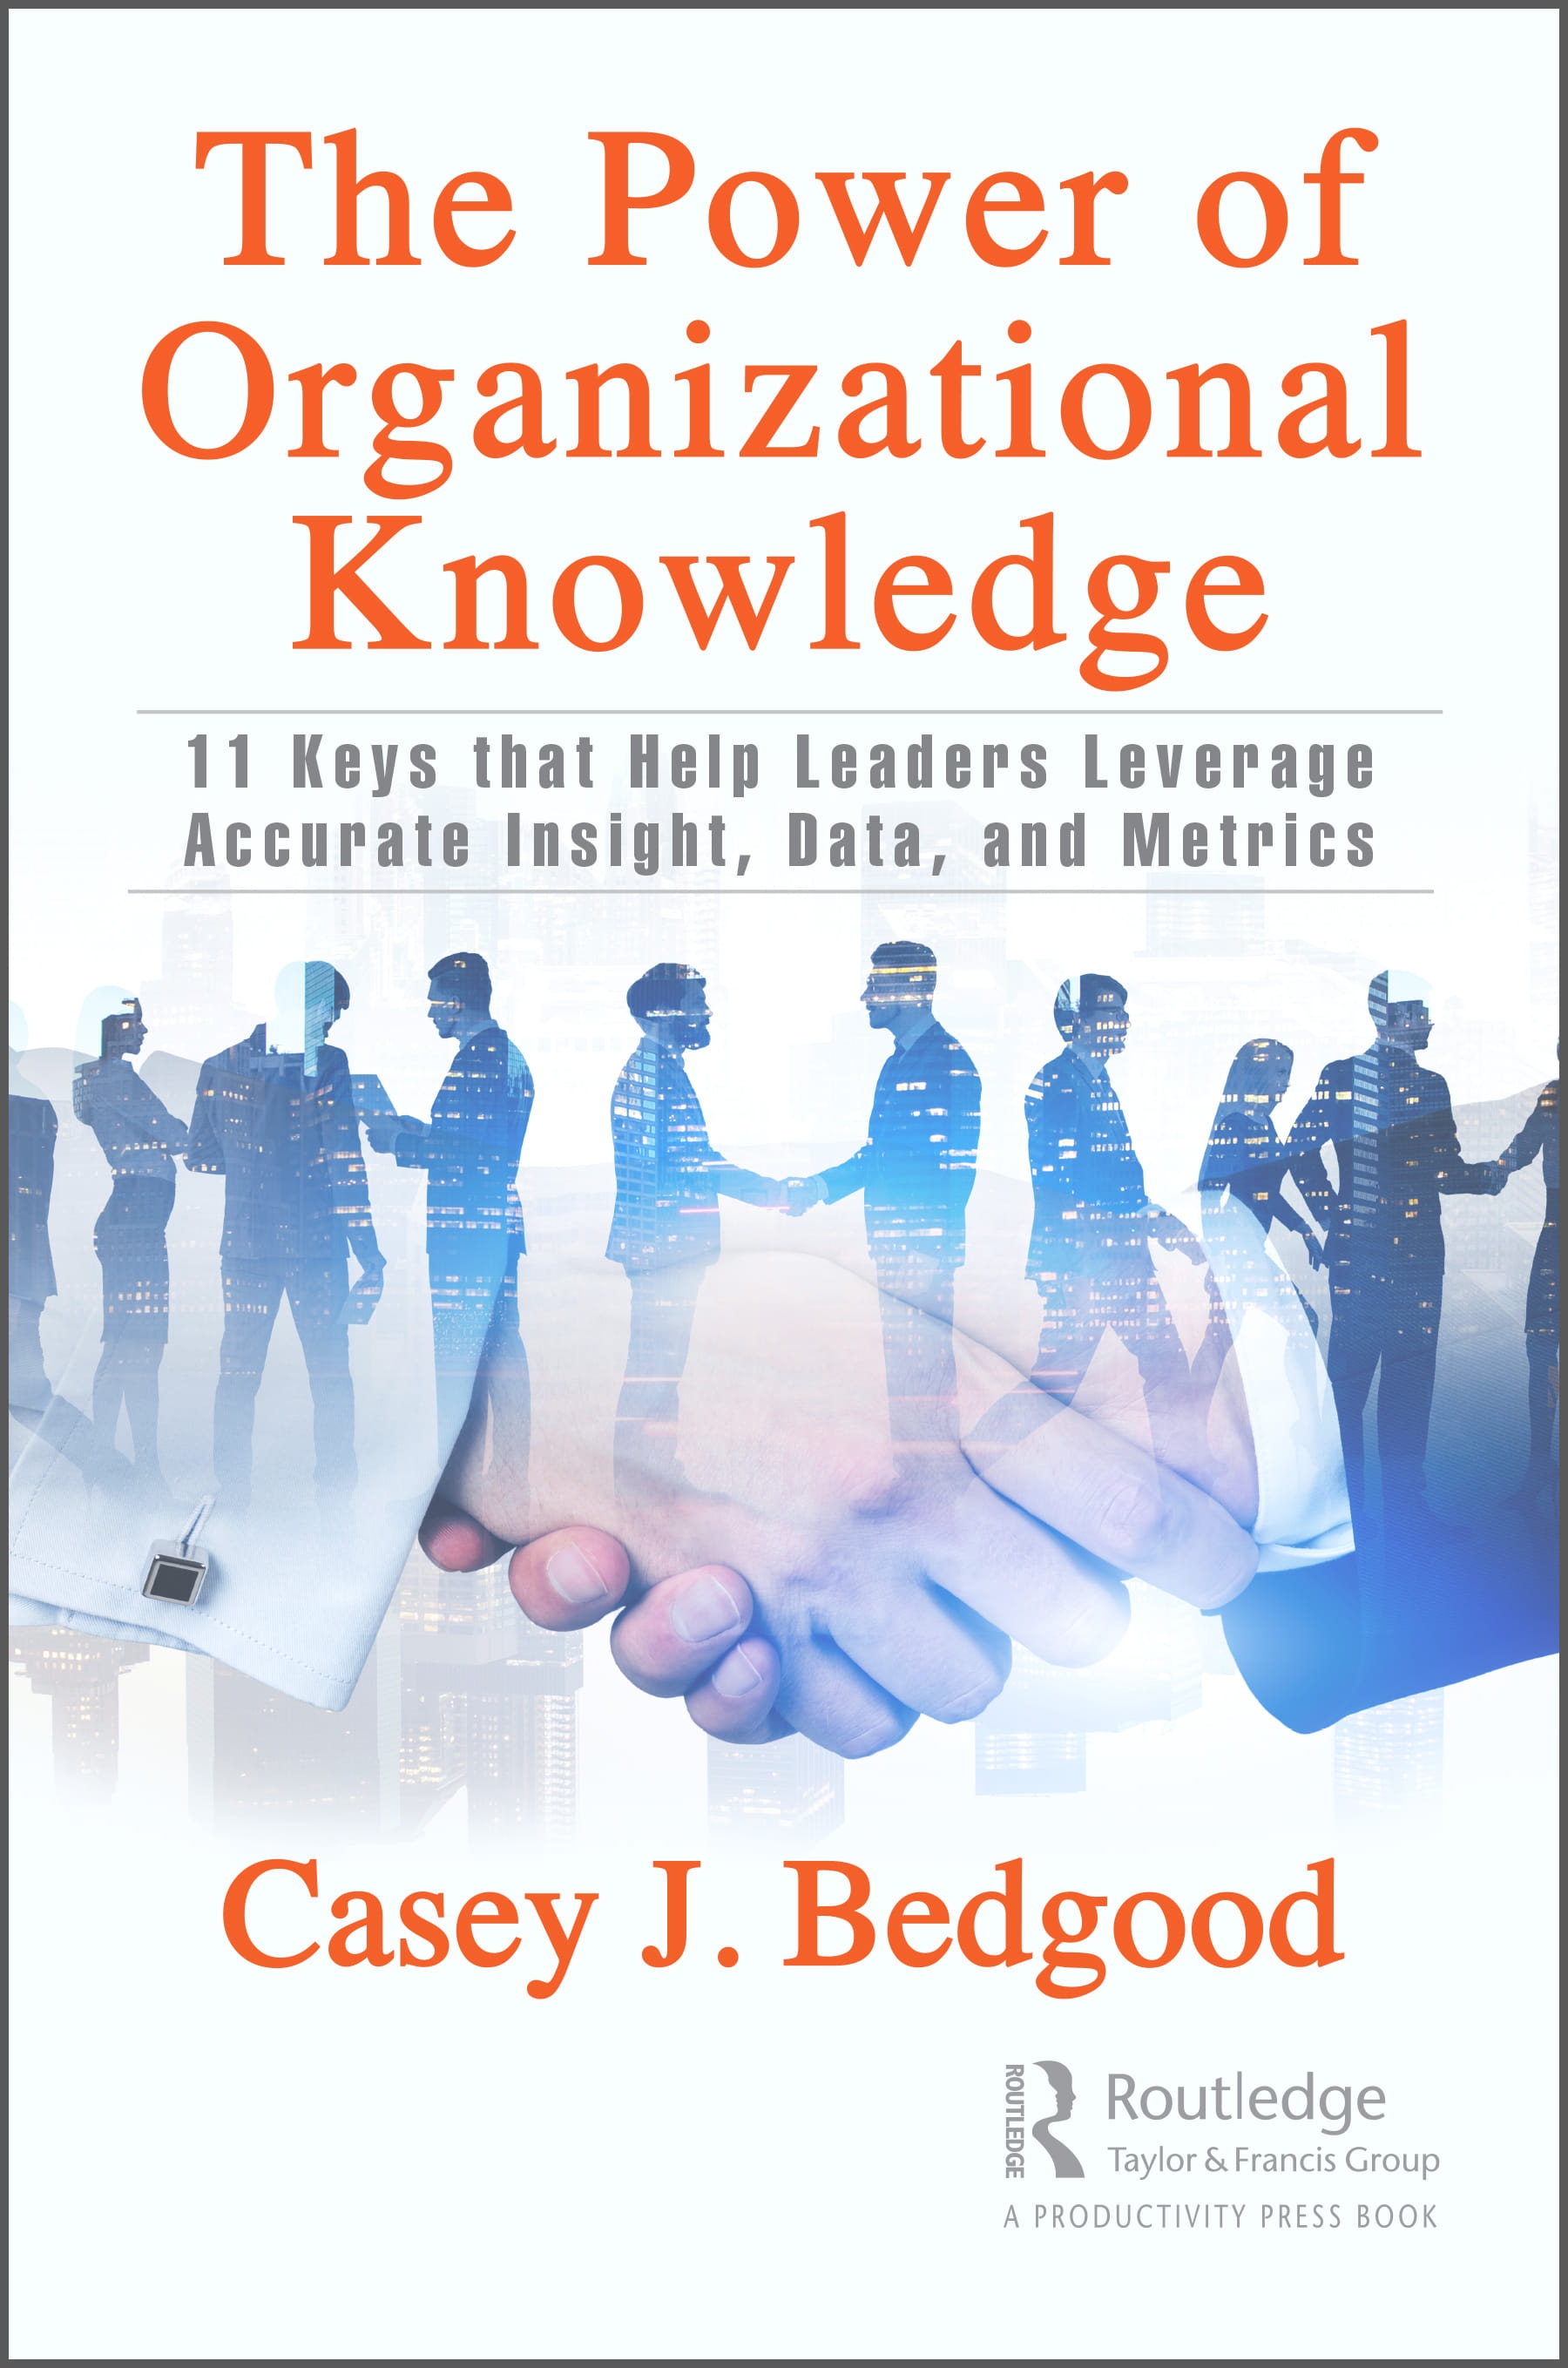 The Power of Organizational Knowledge: 11 Keys That Help Leaders Leverage Accurate Insight, Data, and Metrics